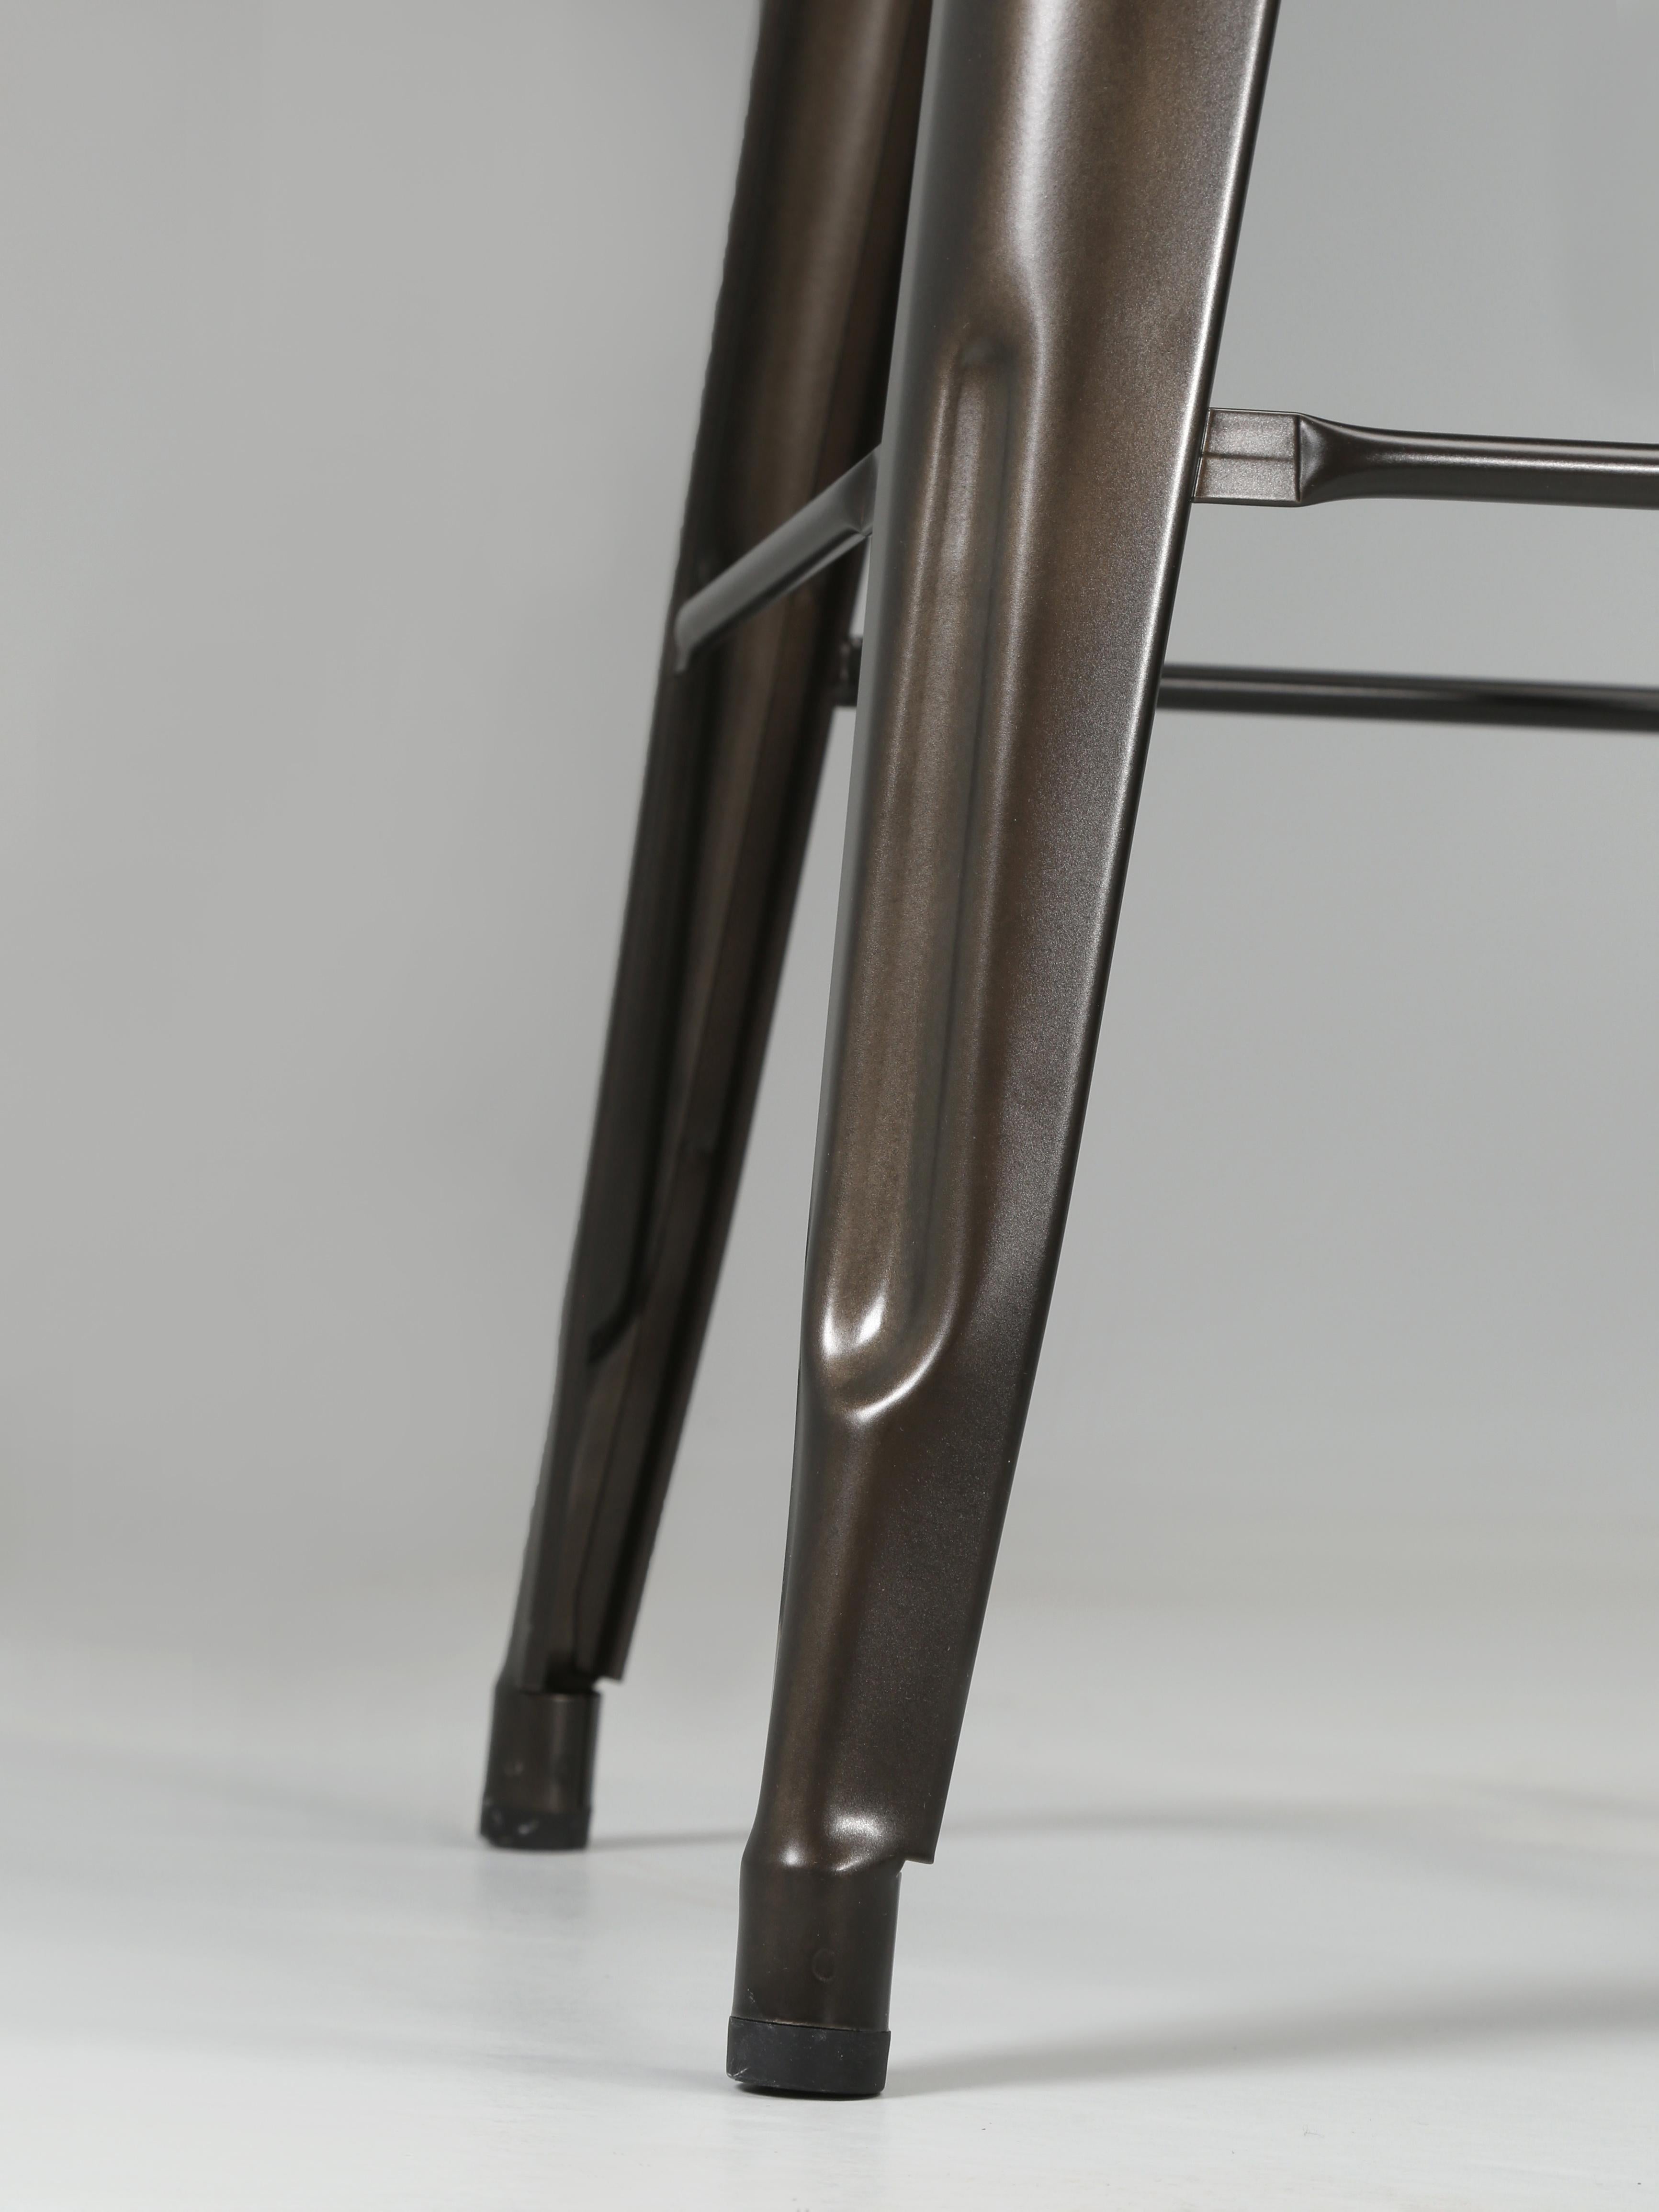 Tolix Bar Height Steel Stacking Stools, Hand-Made in France in Warm Graphite In Excellent Condition For Sale In Chicago, IL